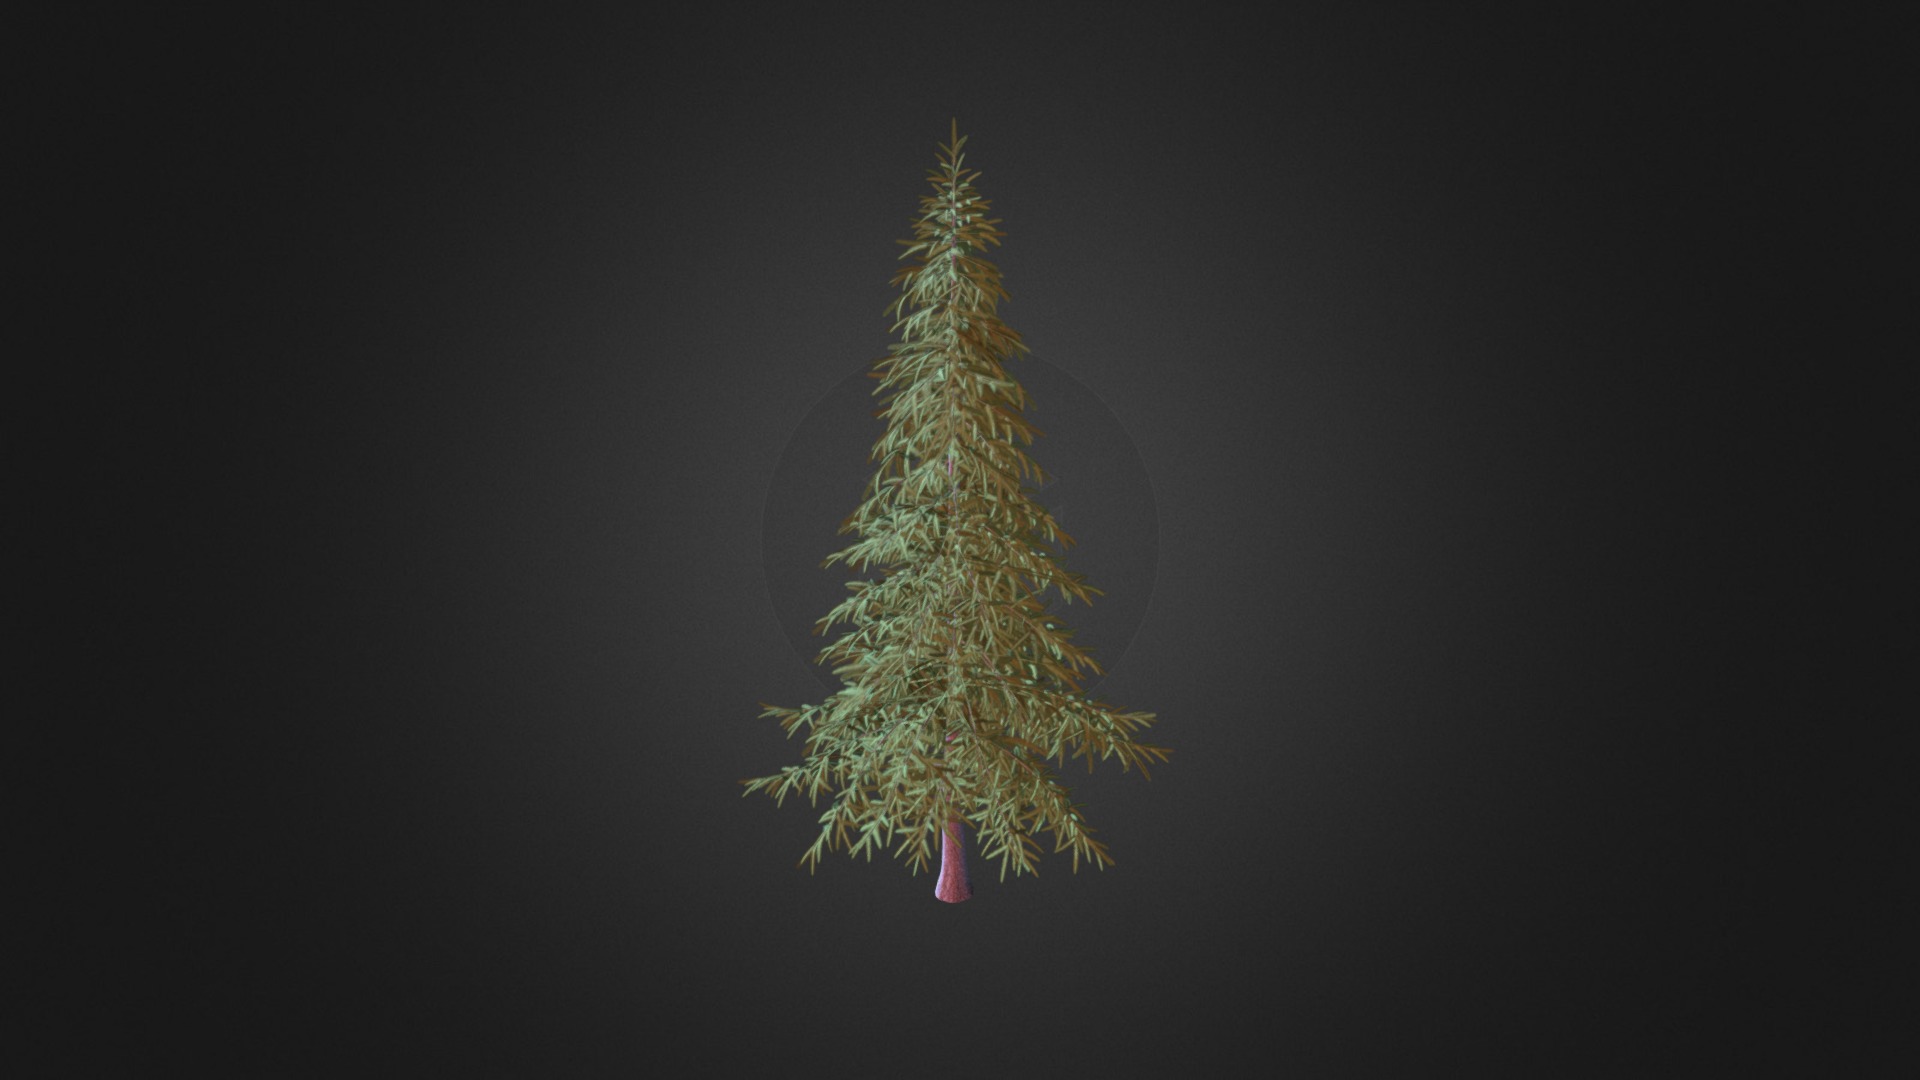 3D model Fir Tree 3D Model 5.9m - This is a 3D model of the Fir Tree 3D Model 5.9m. The 3D model is about a green tree with a red ribbon.